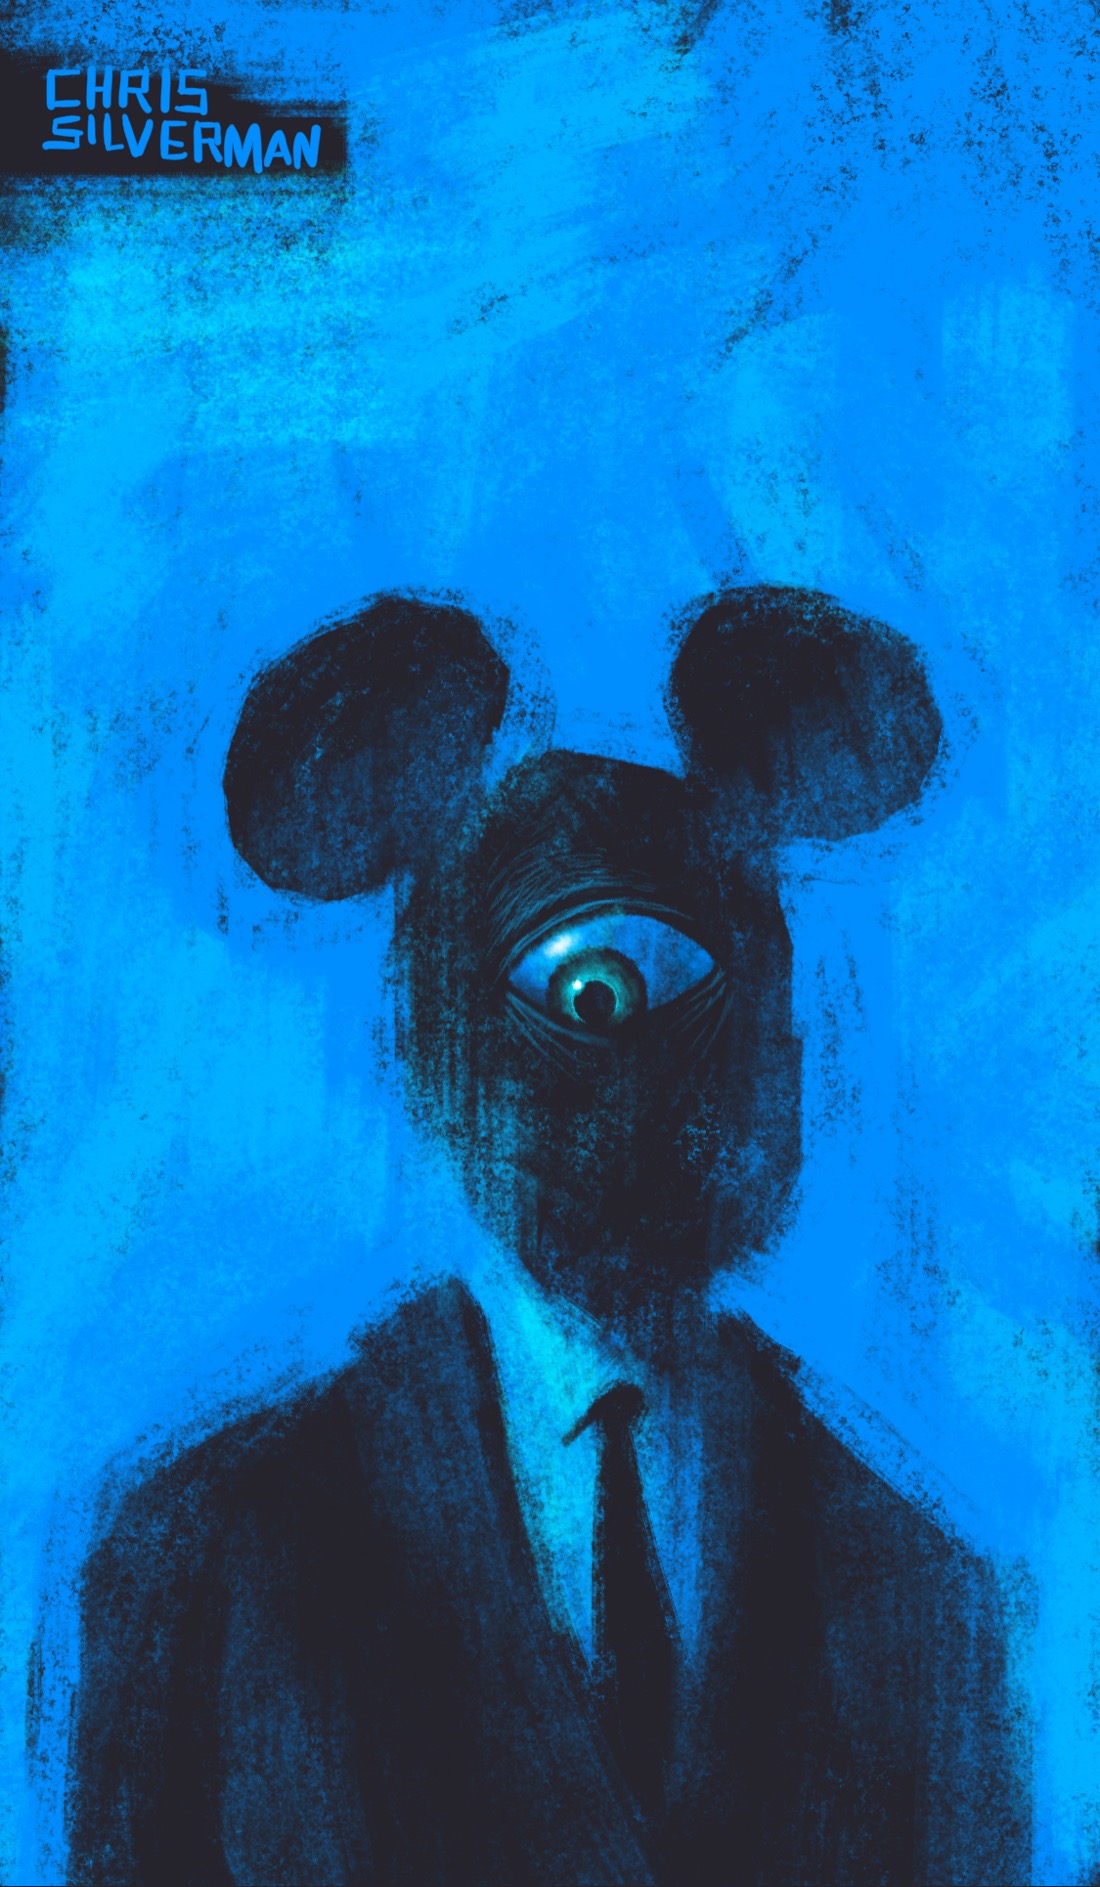 A bizarre figure wearing a formal jacket and tie. The figure has two large round ears on top of its head, similar to Mickey Mo—er, "Steamboat Willie"—and one giant eye in the middle of its face. No other facial features are visible. This is a black drawing on a cold blue background.